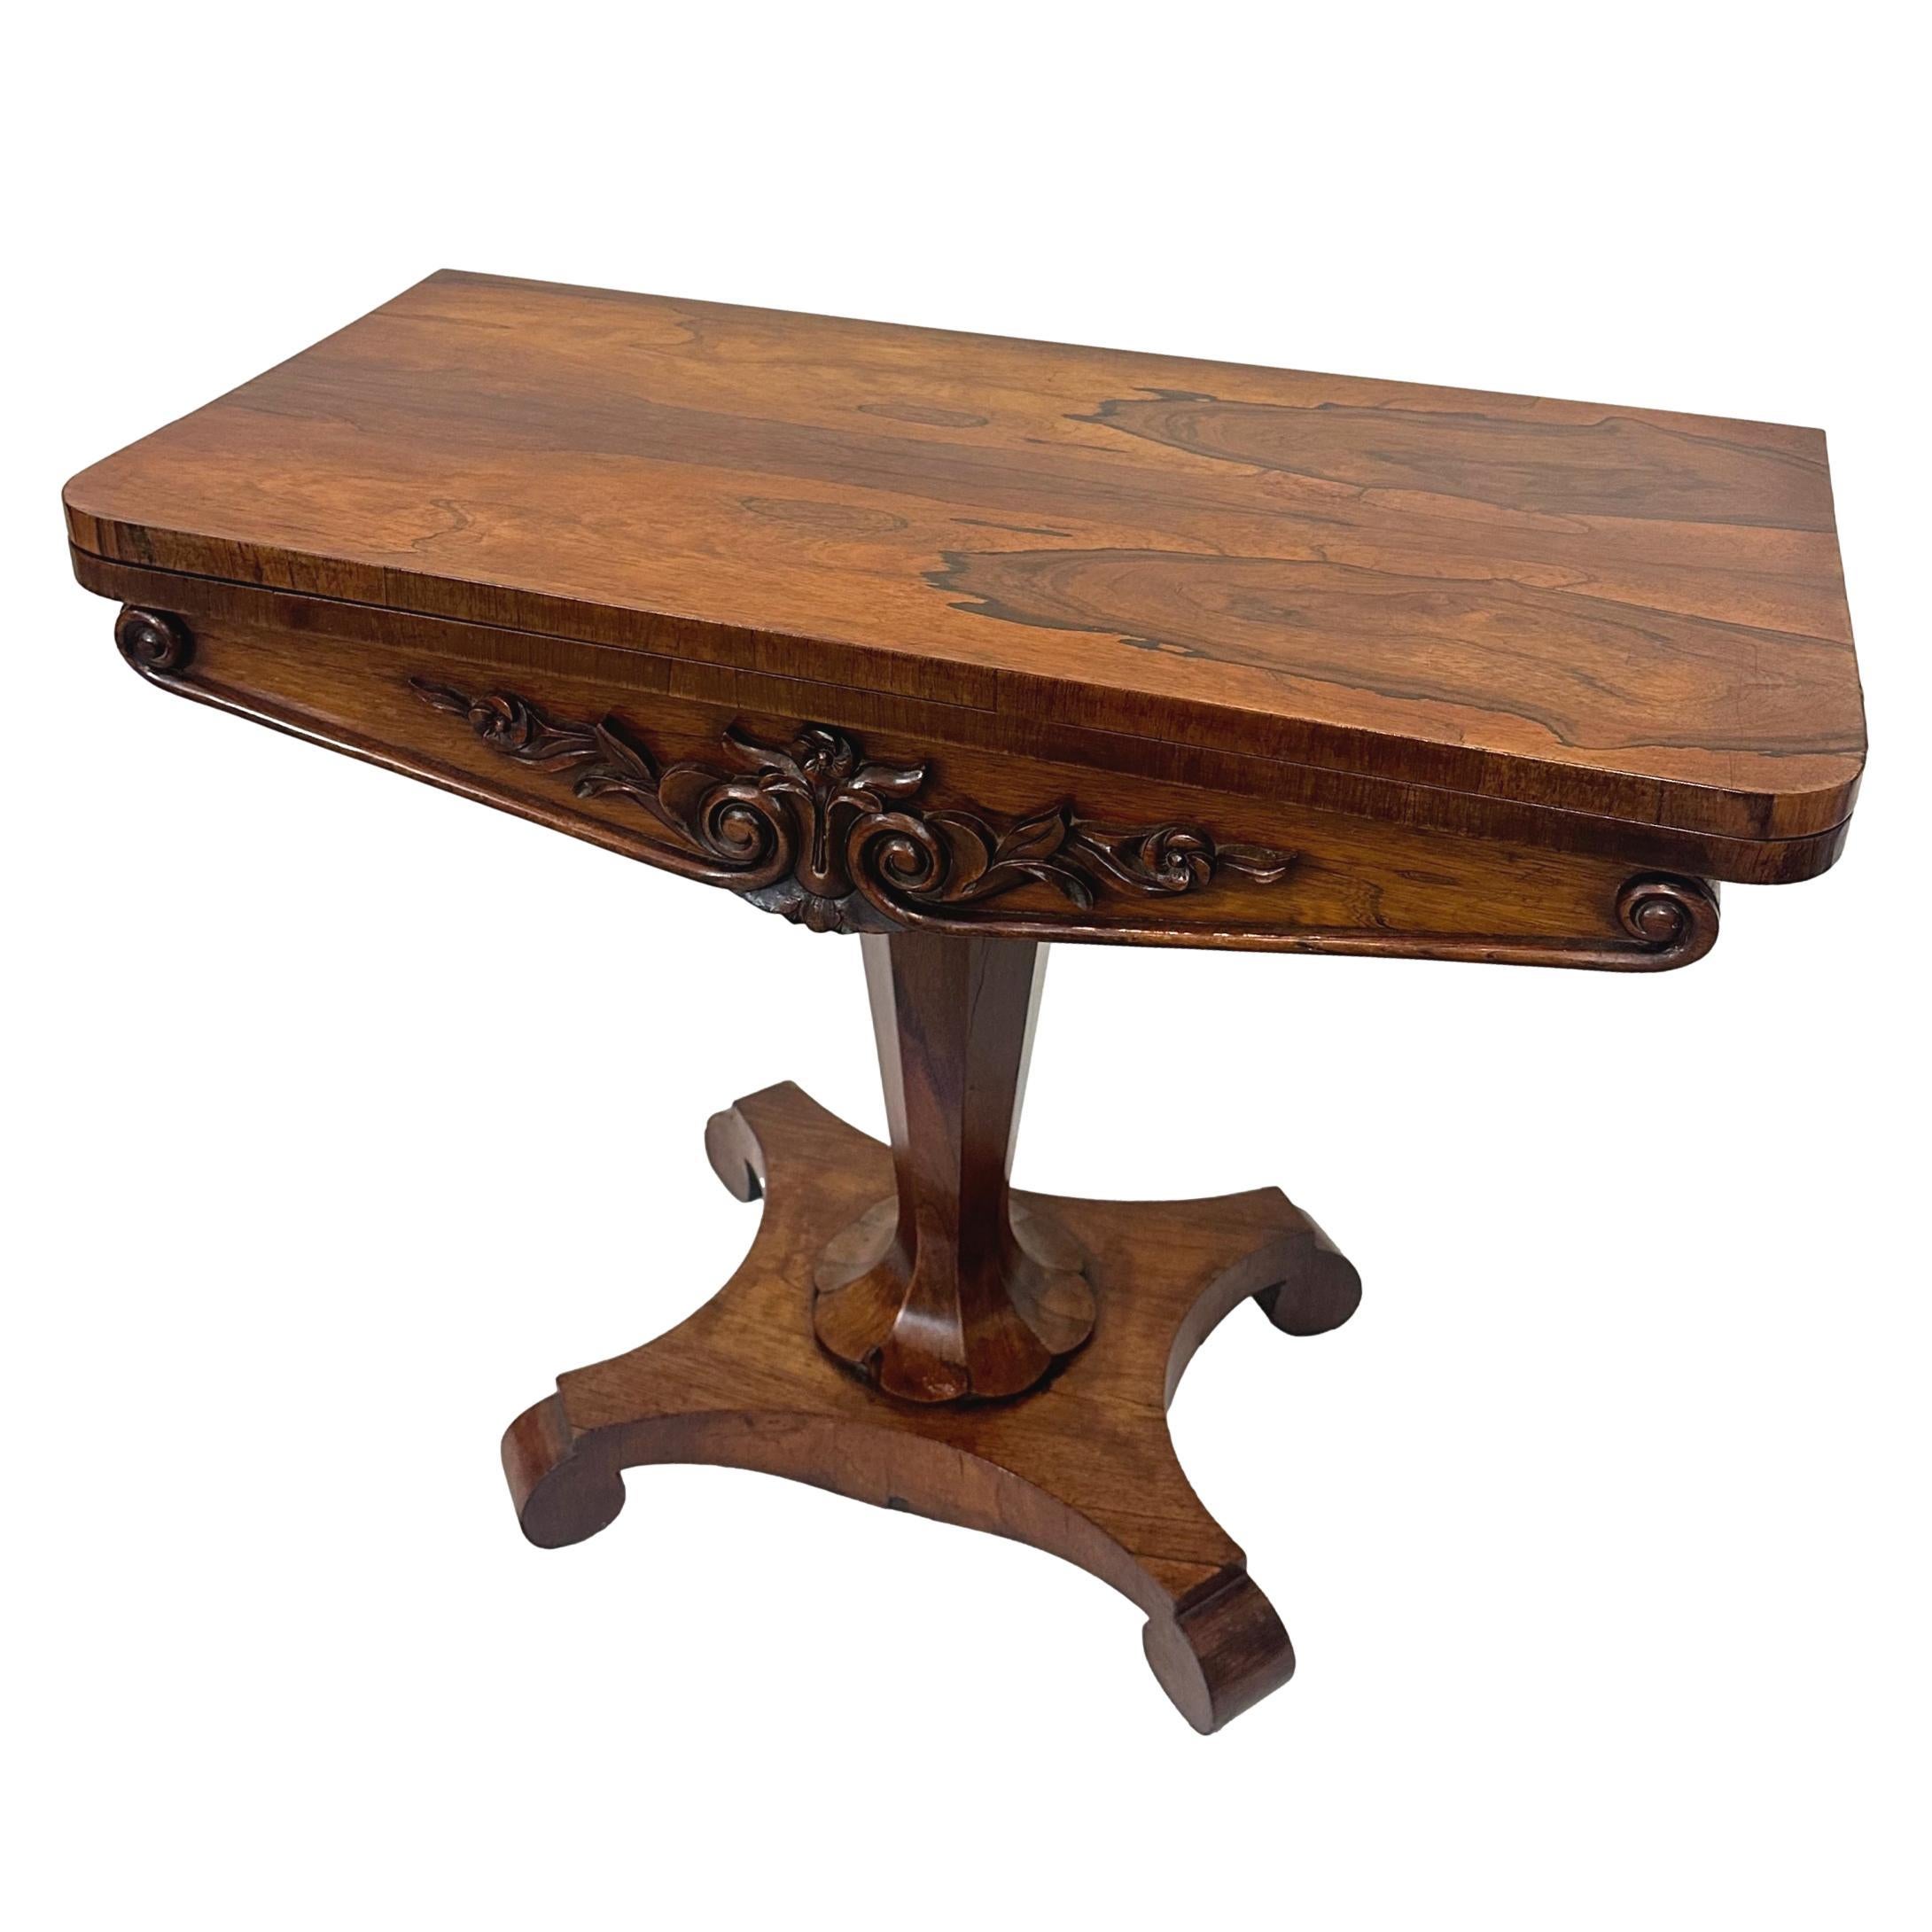 Hand-Crafted An Antique William IV Rosewood Period Card Table & Side Table, English, ca. 1835 For Sale